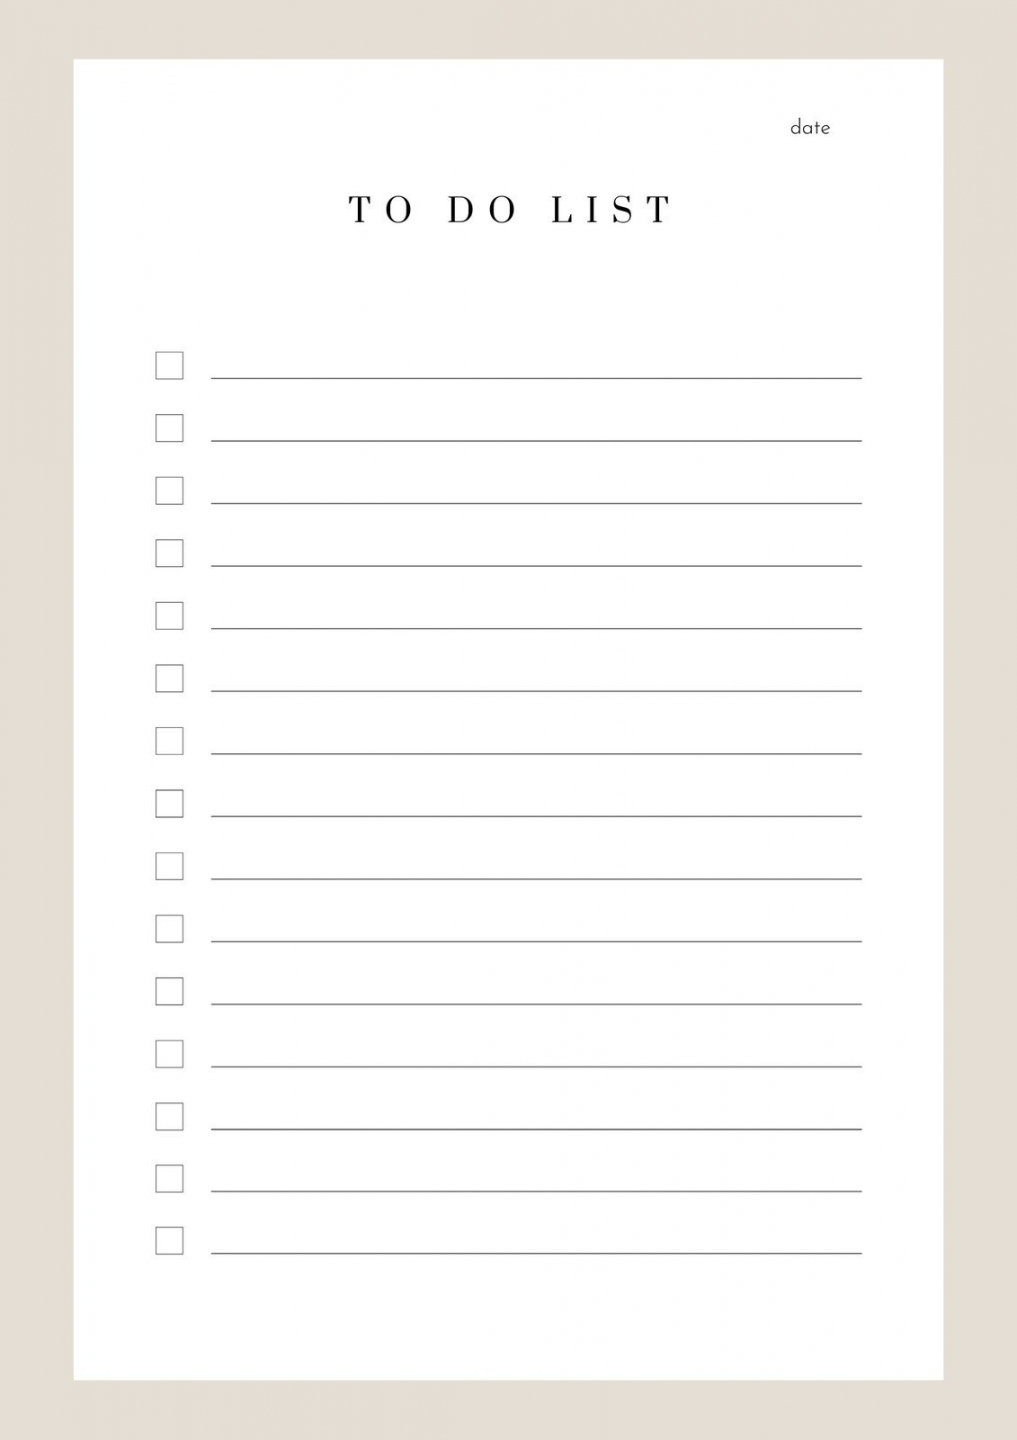 Free and customizable to do list templates - FREE Printables - To Do List Free Printable